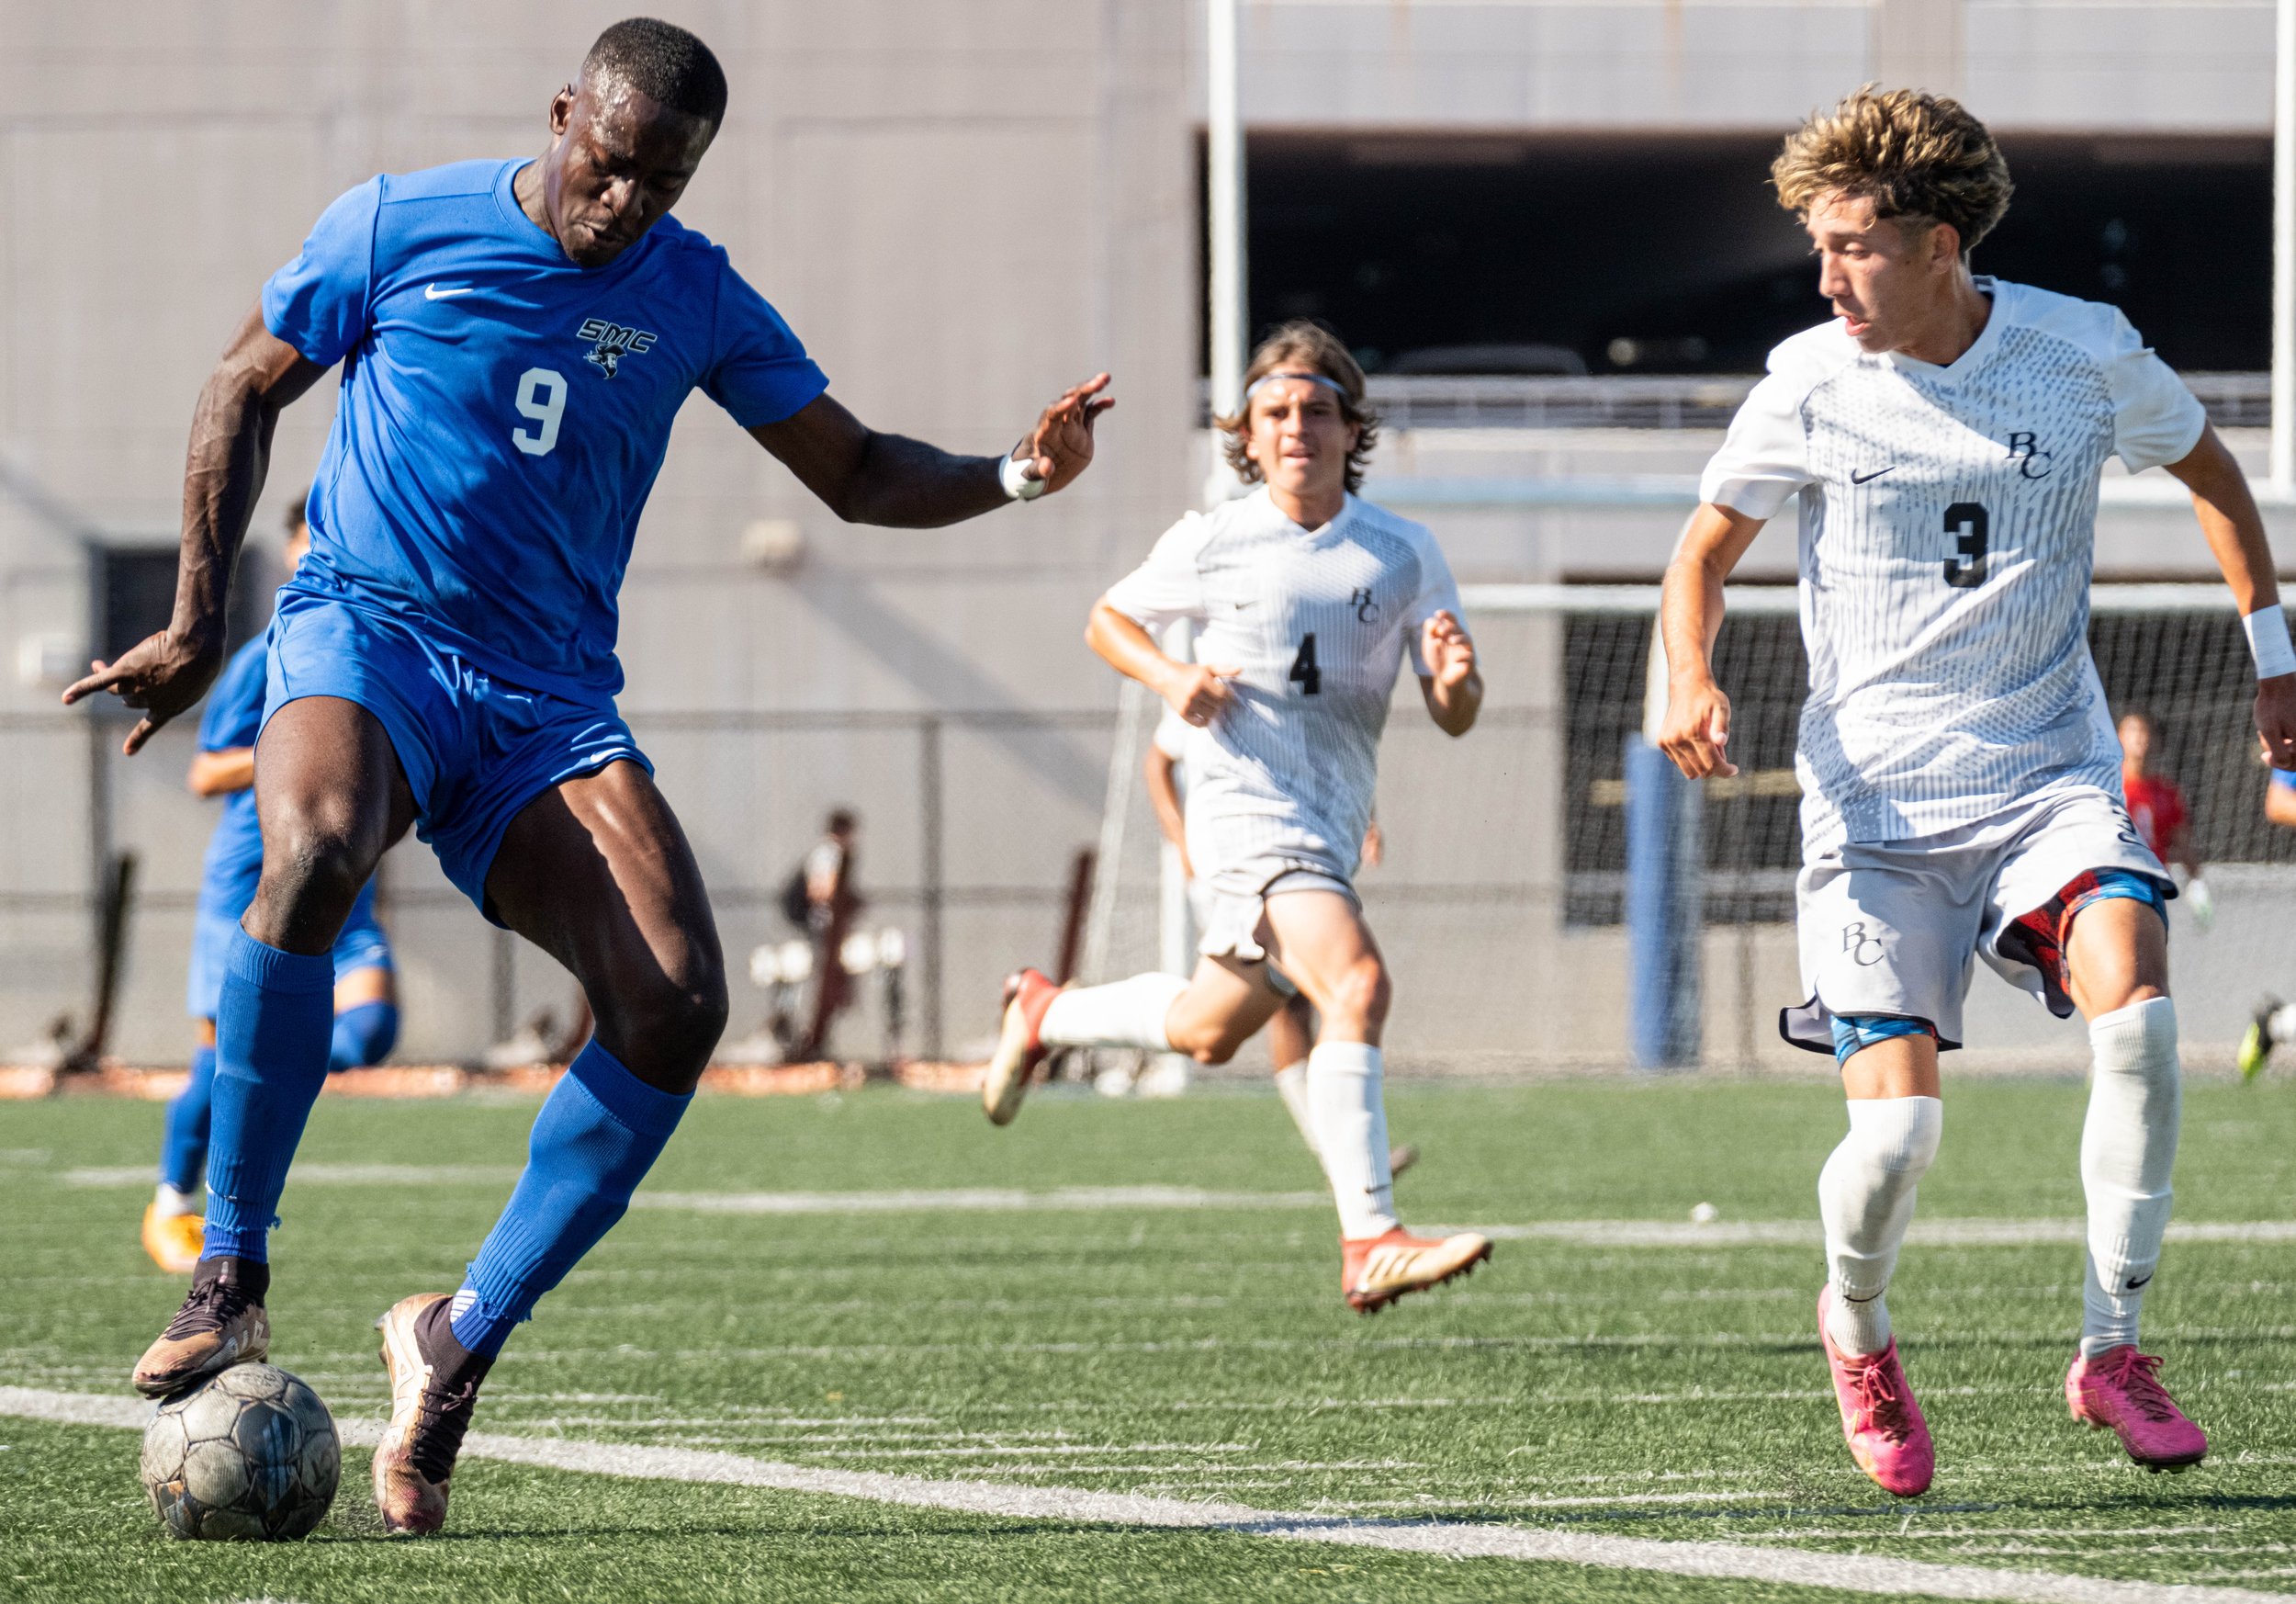  Santa Monica College(SMC) men's soccer forward Philip Hephzibah(3) performing the pull behind leg skill move to get past Bakersfield Renegade defender Elijah Espinoza(3) on Tues, Oct. 3. SMC would go and shutout the Renegades with a score of 3-0 at 